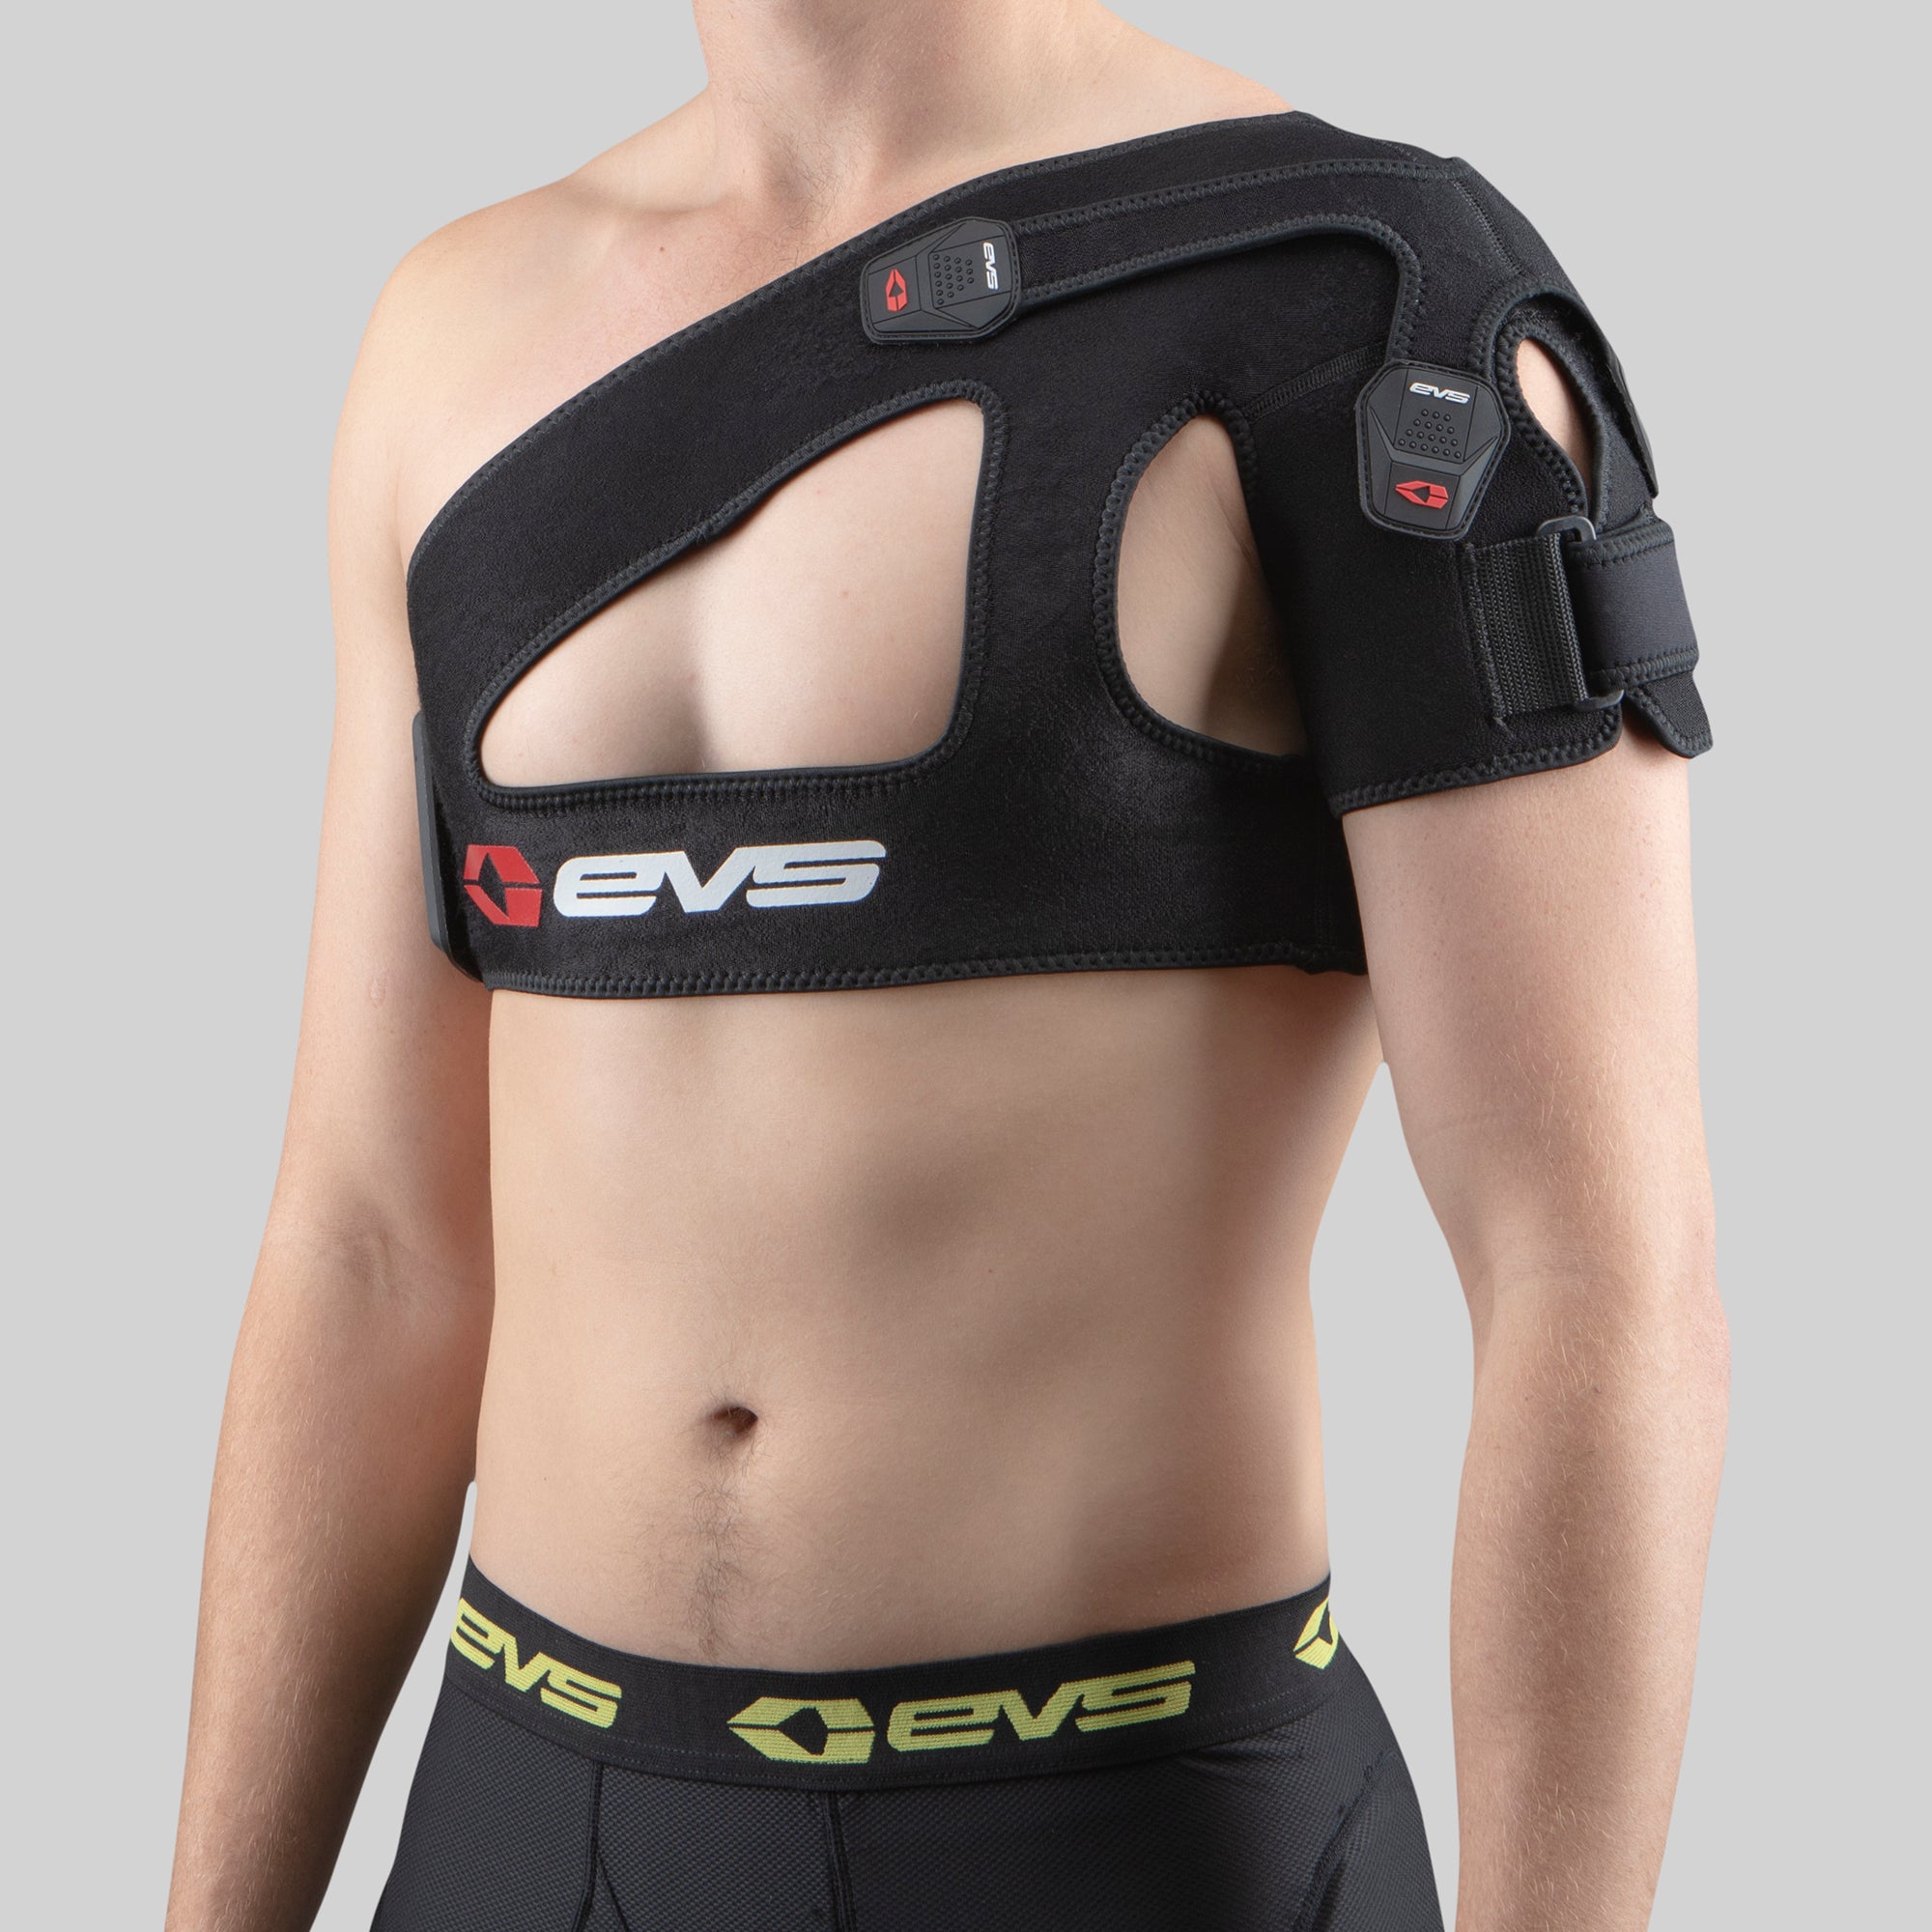 Shoulder Arm Brace, Recovery Fixture Healthy Shoulder Brace Shoulder Tape,  One?Piece Design Shoulder For Braces & Supports Arm Support Brace